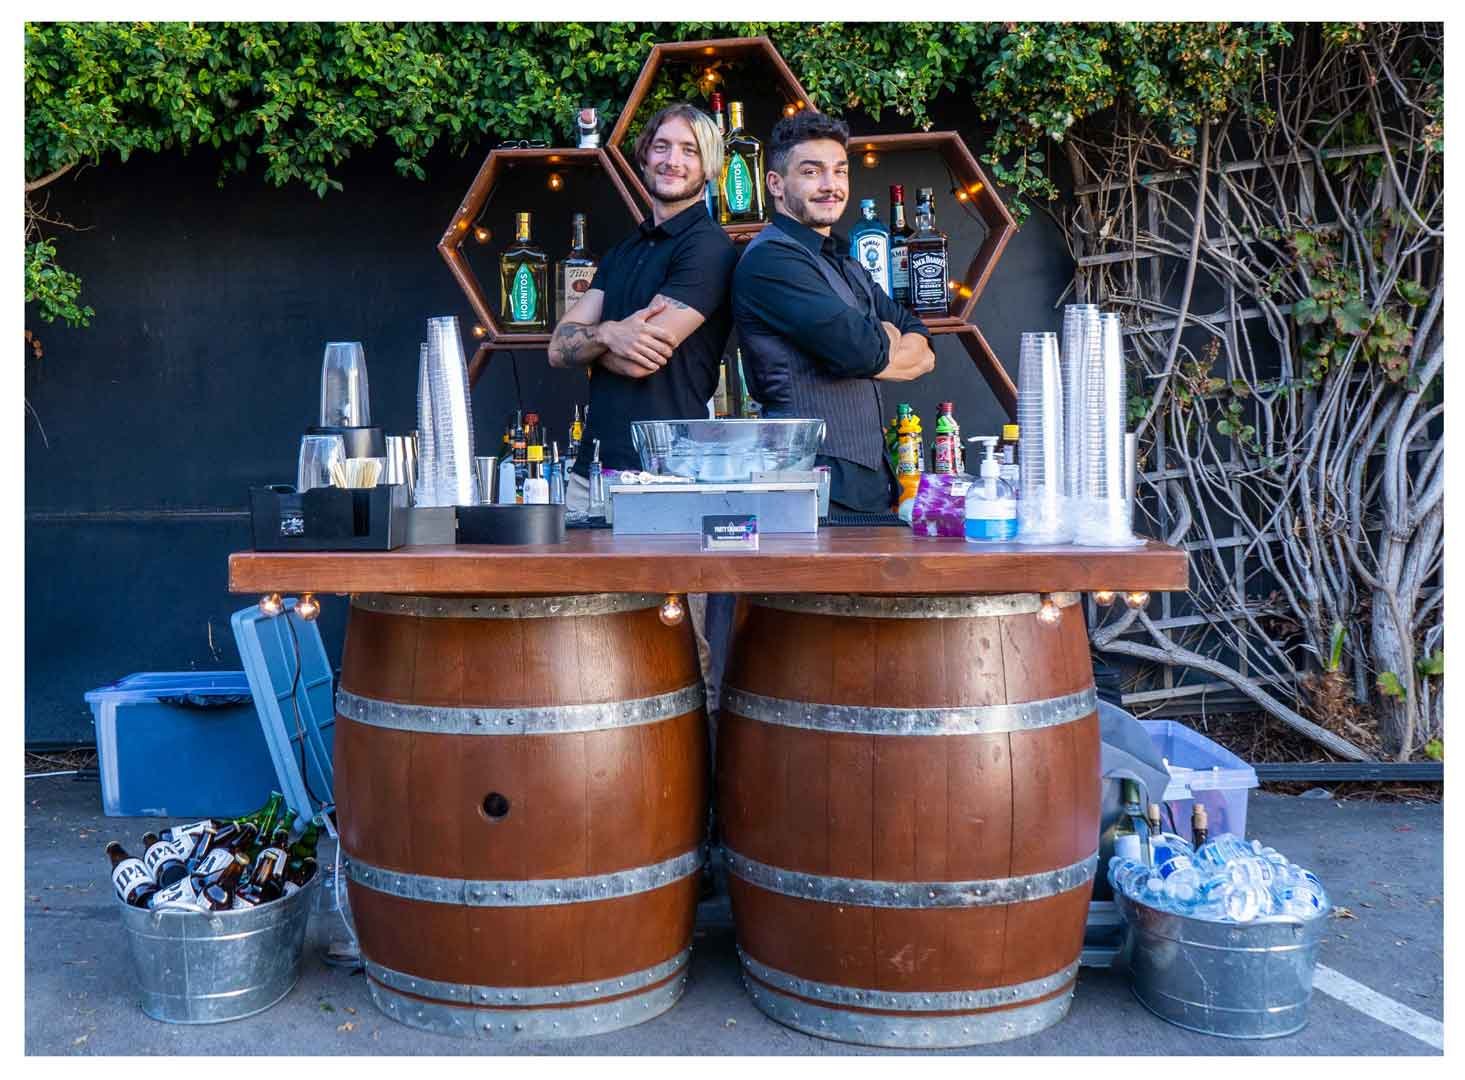 Bartending community: How to help each other grow